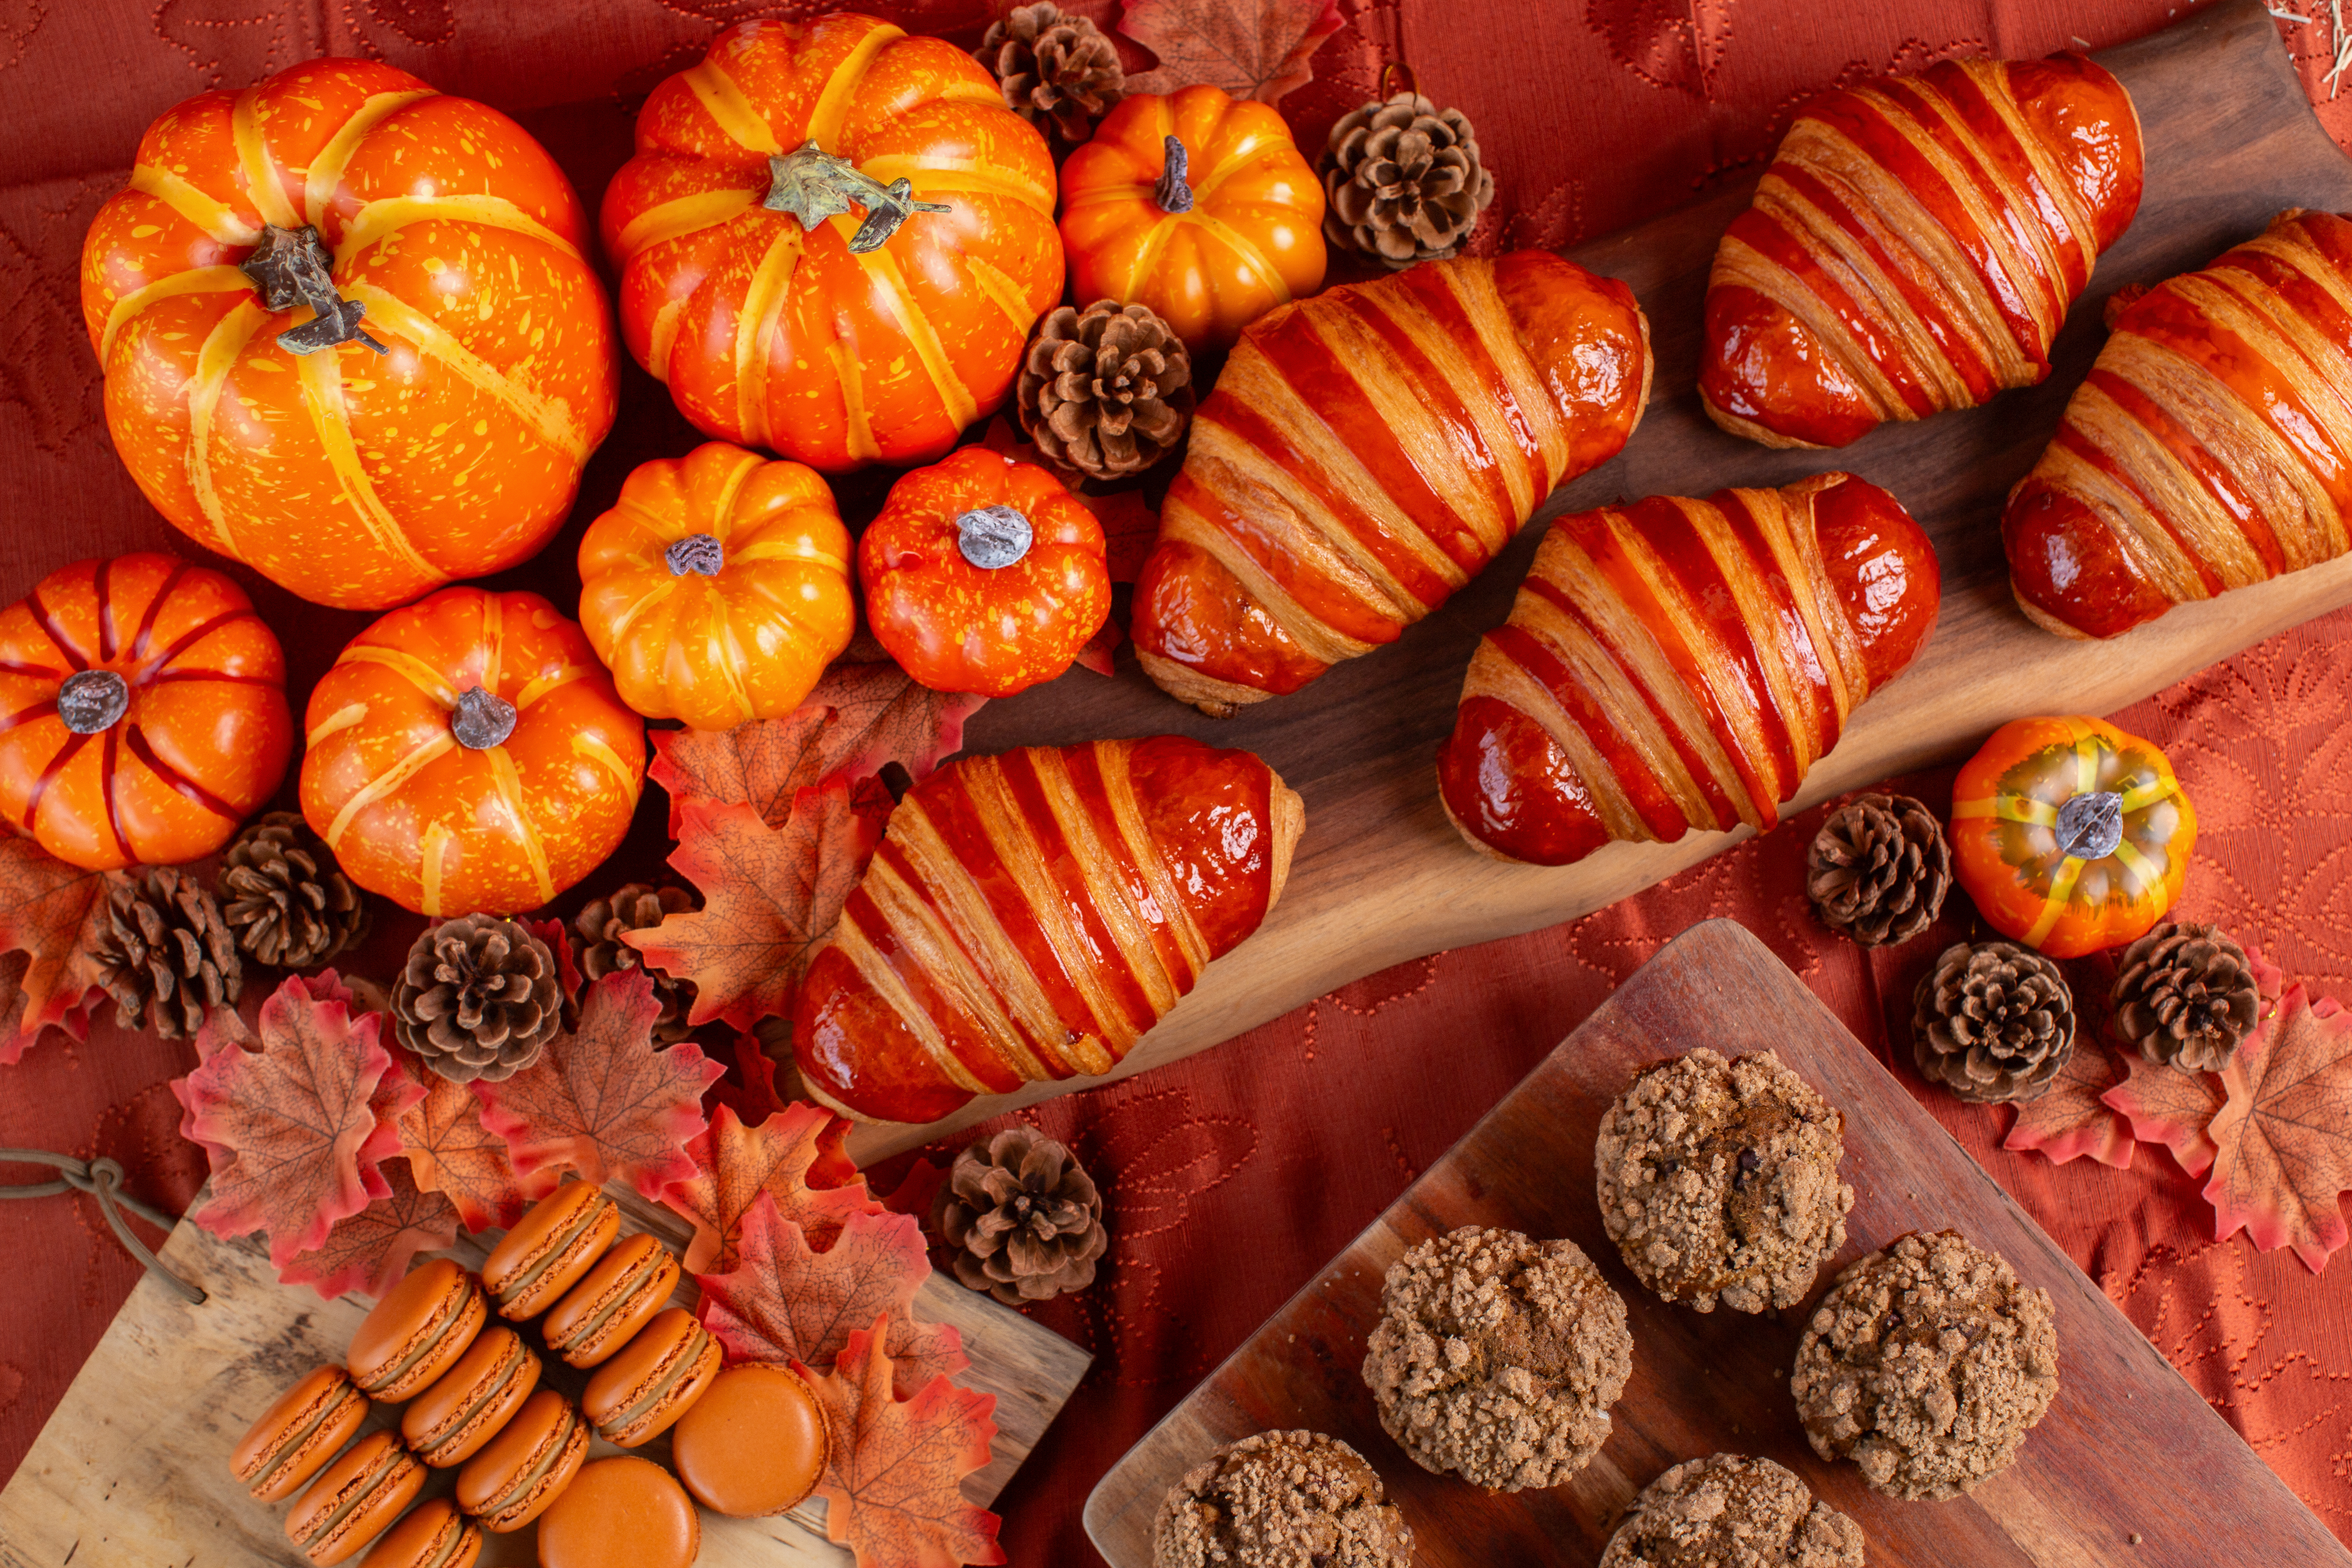 A spread of Common Bond’s pumpkin-themed treats, including pumpkin croissants, macarons, and muffins.